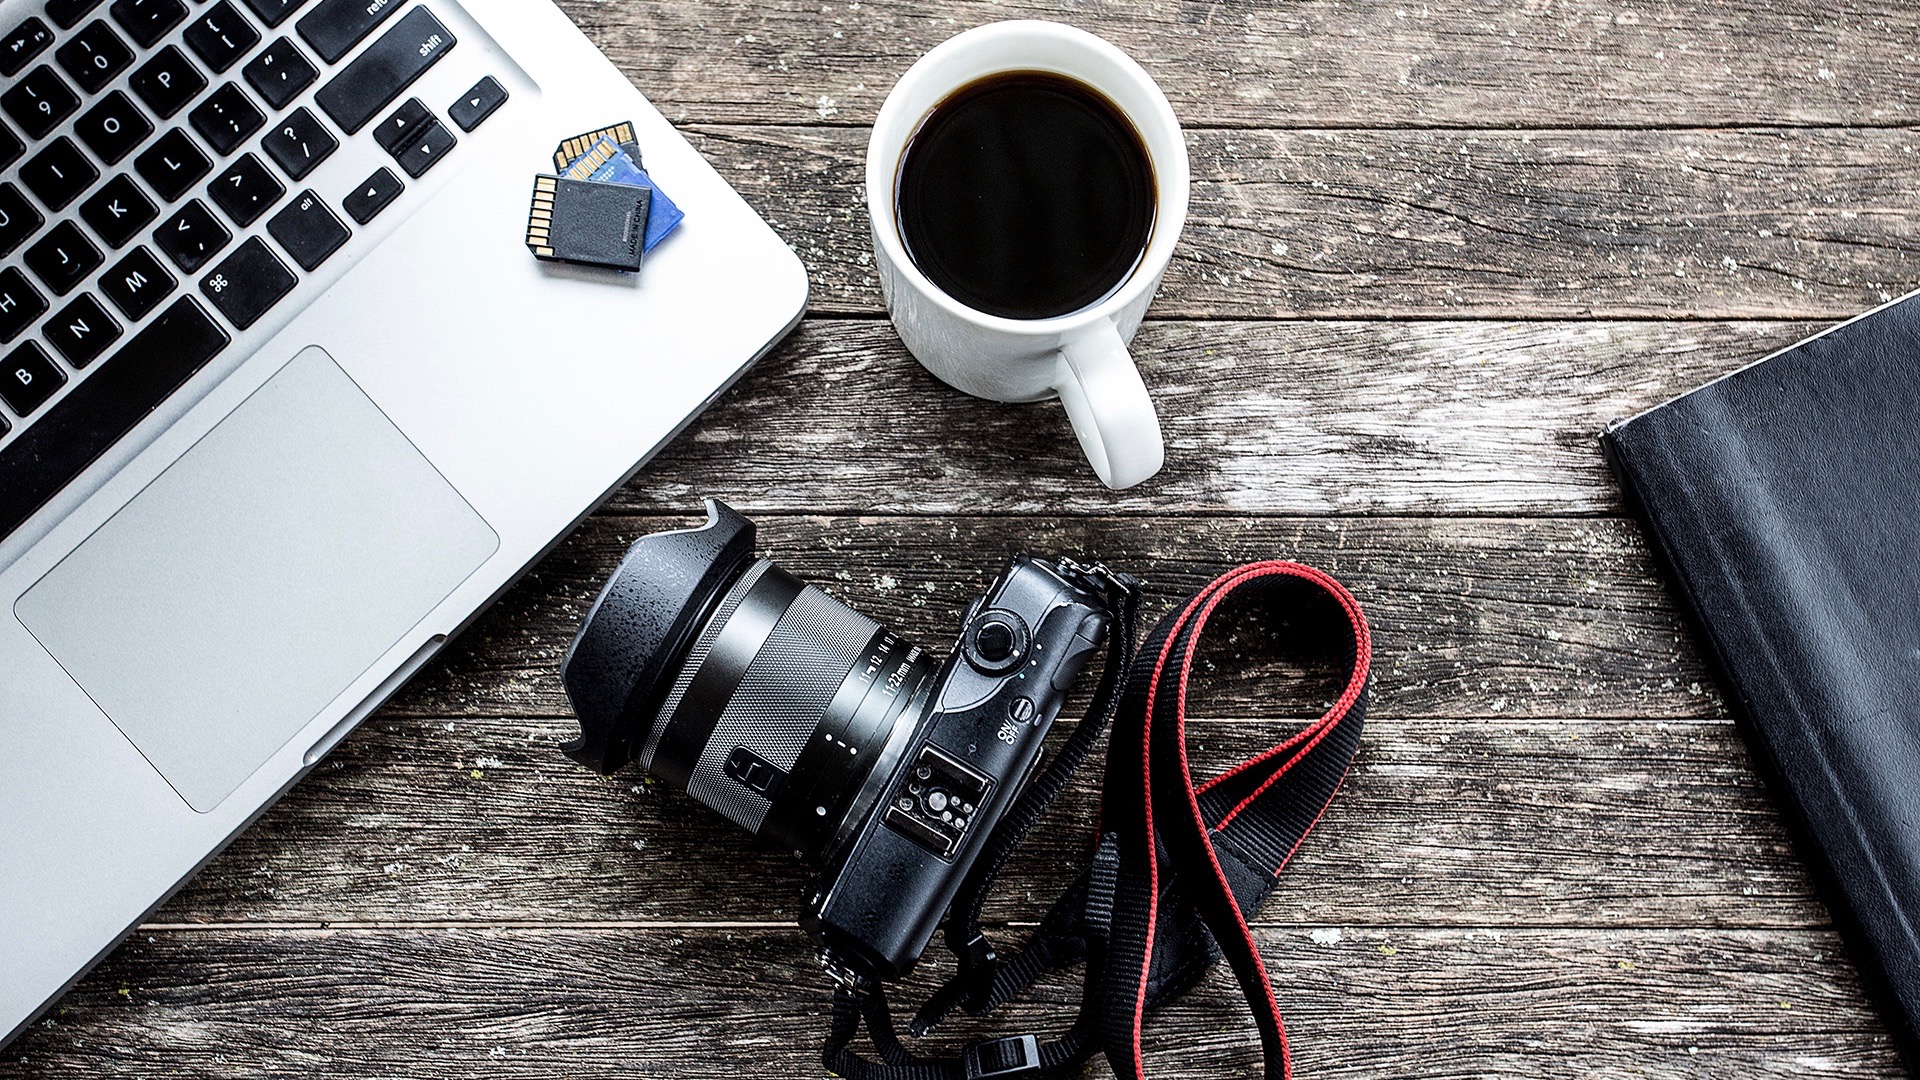 The Best Photo Editing Software For Photographers in 2020